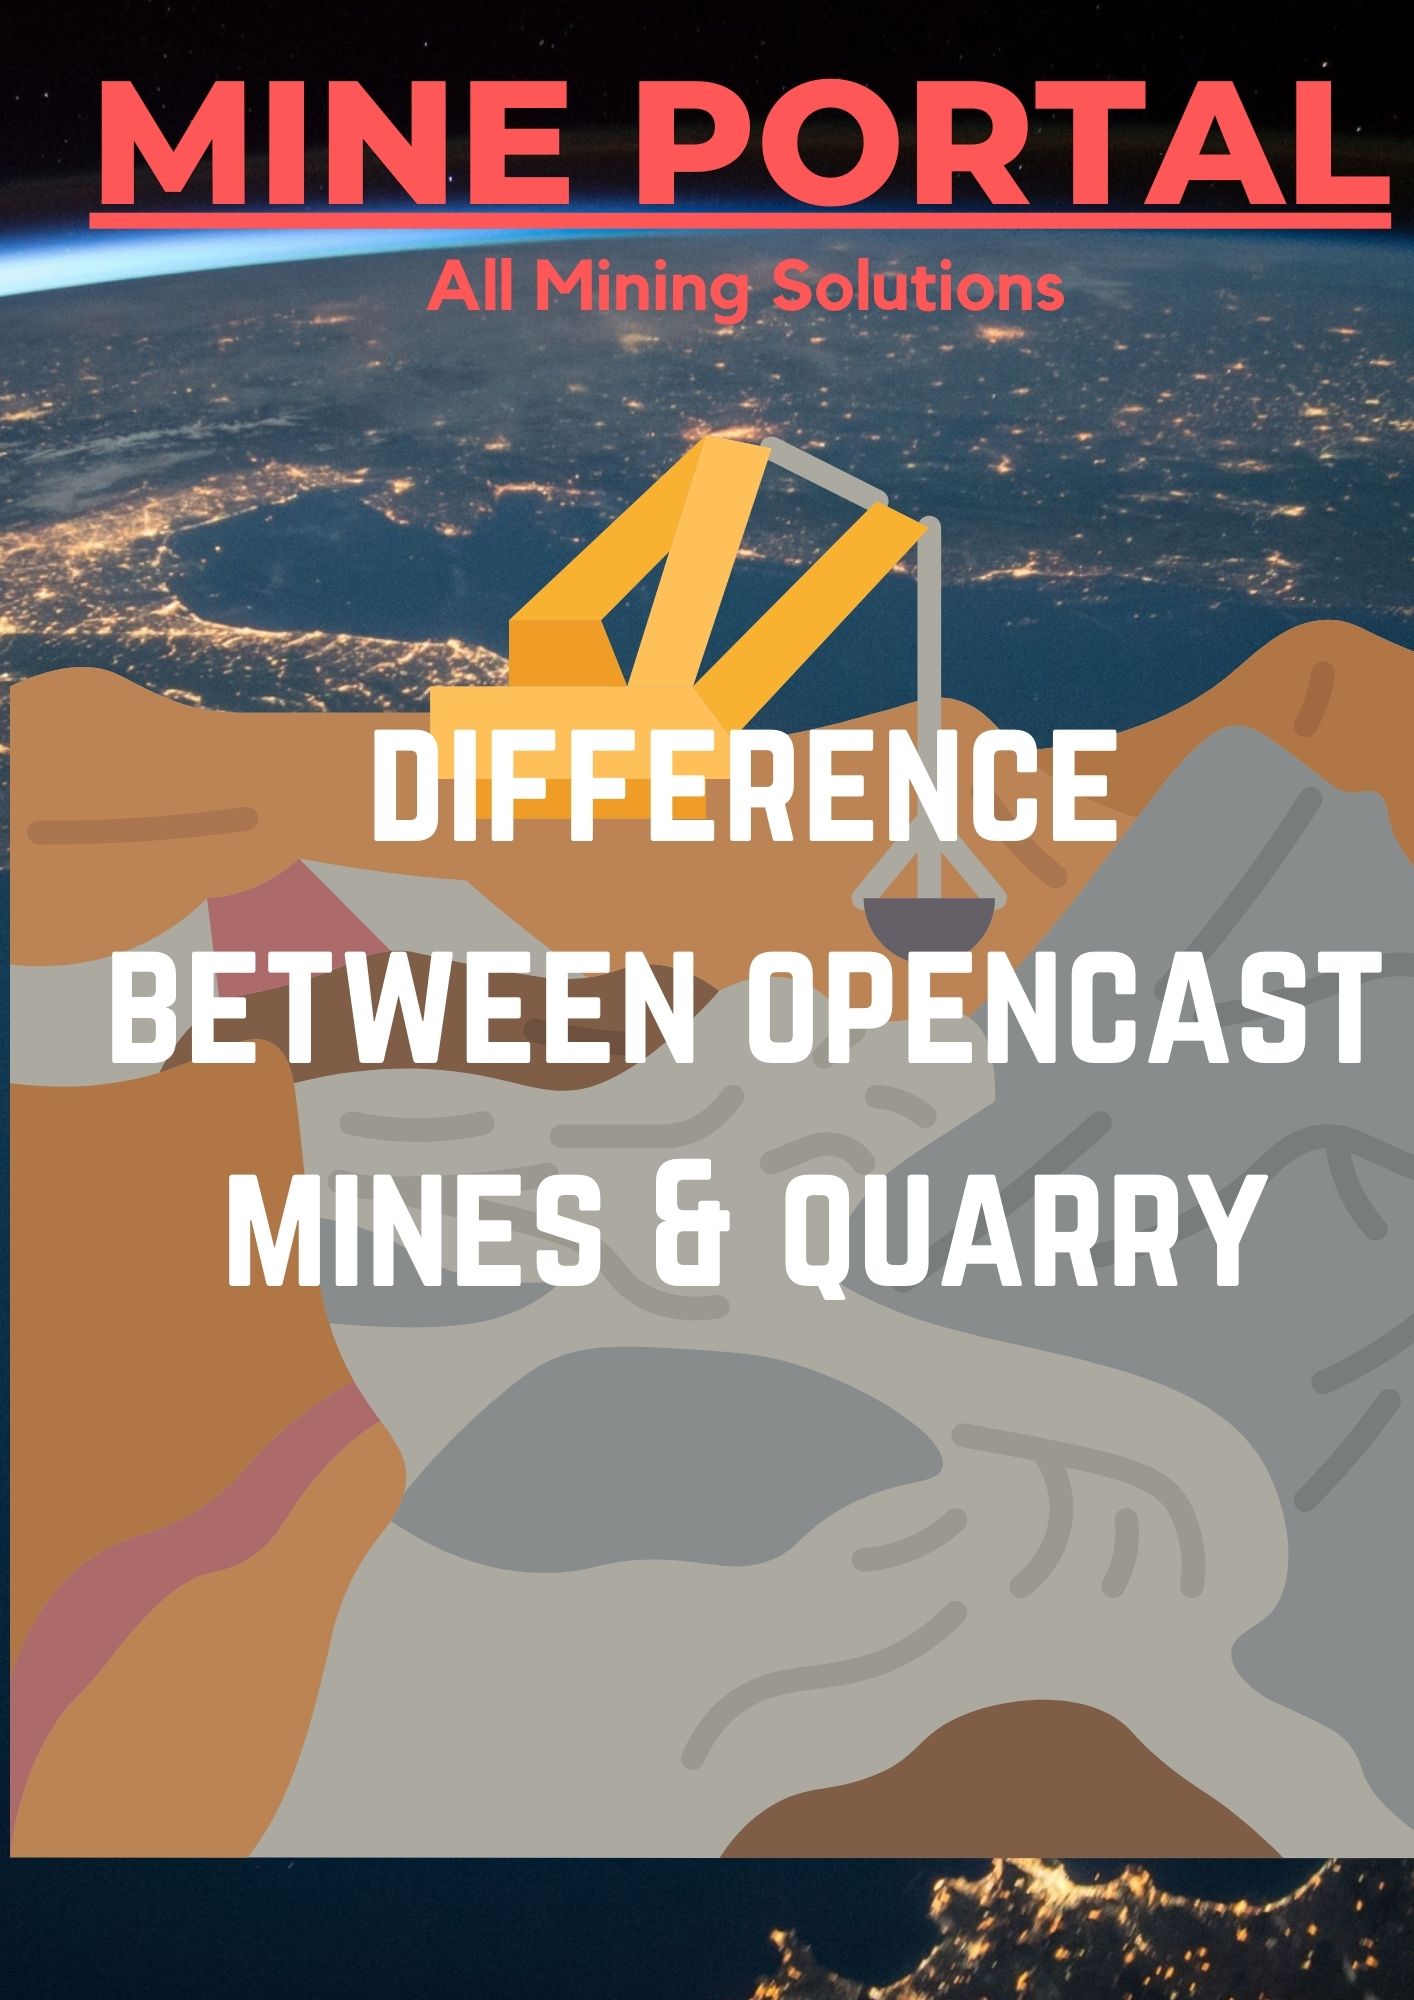 DIFFERENCE BETWEEN OPEN CAST MINE & QUARRY